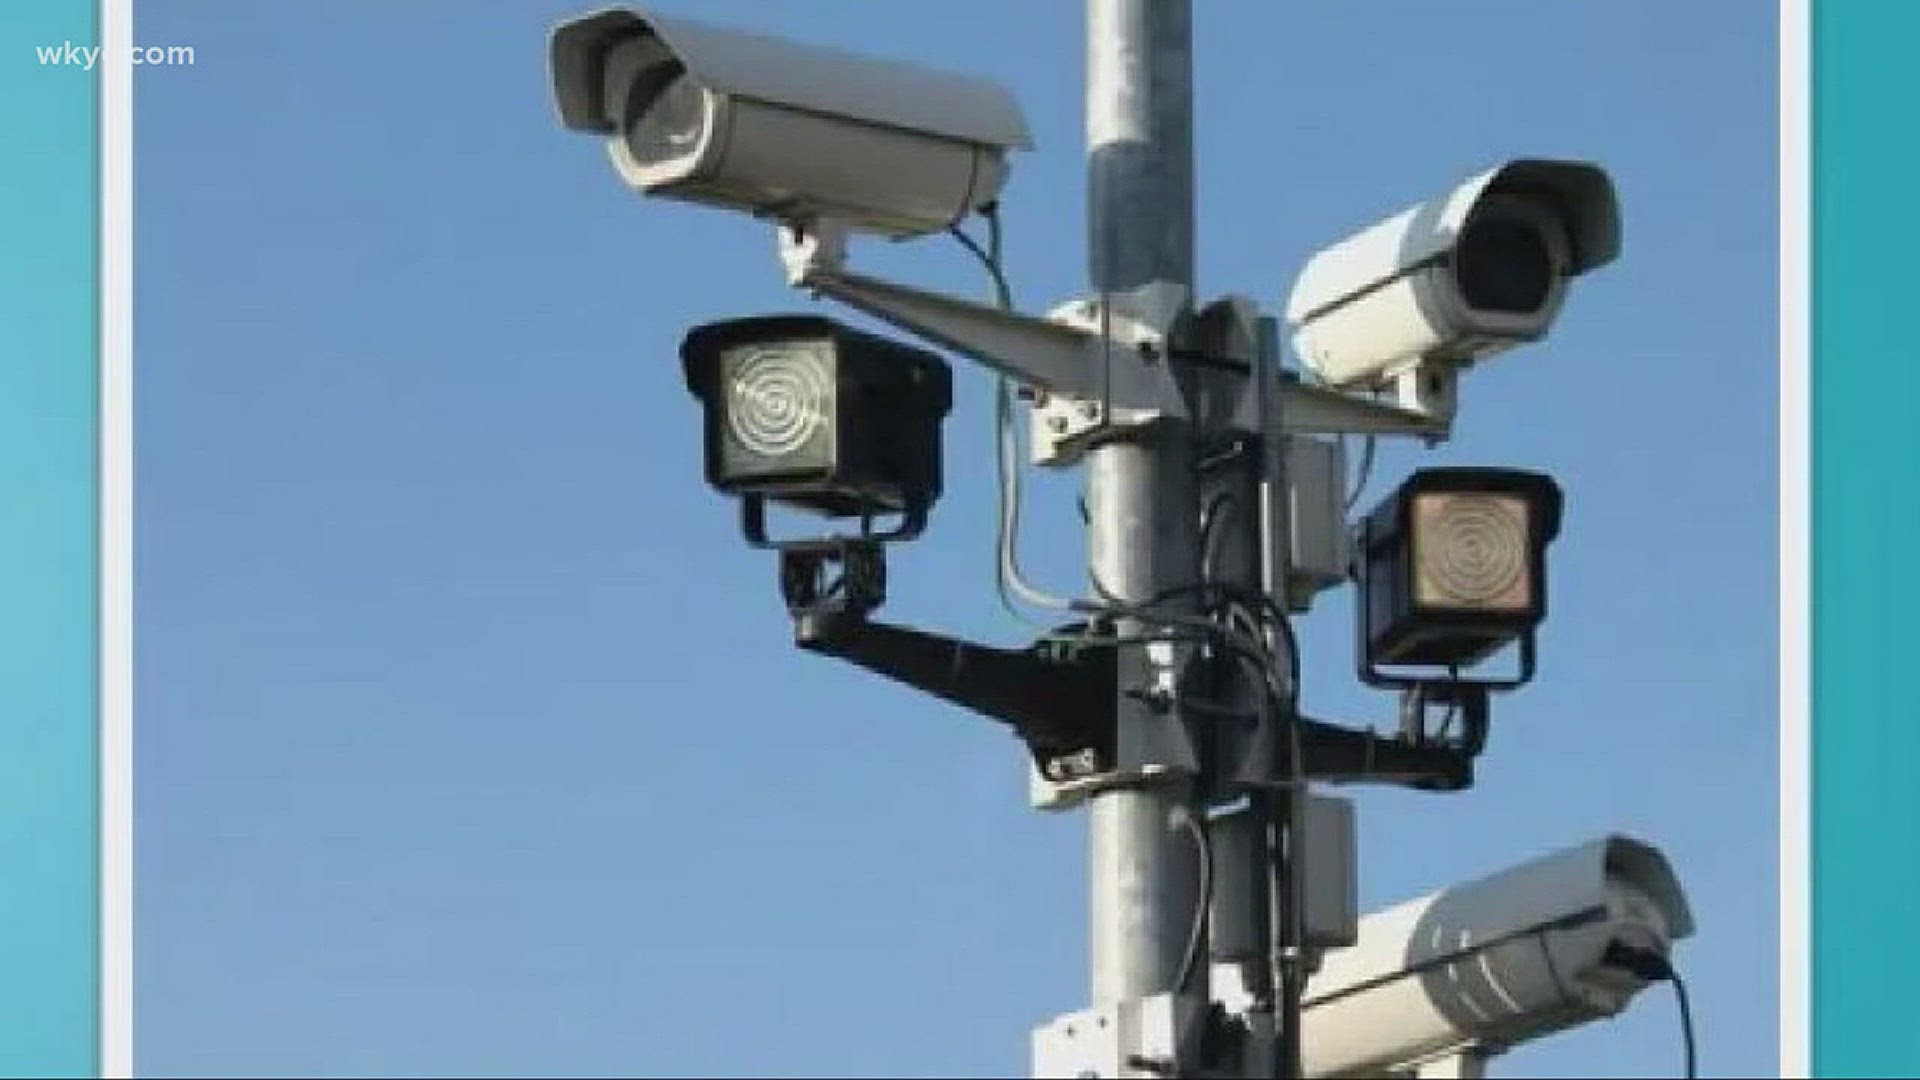 License plate scanners to be installed in Cuyahoga County